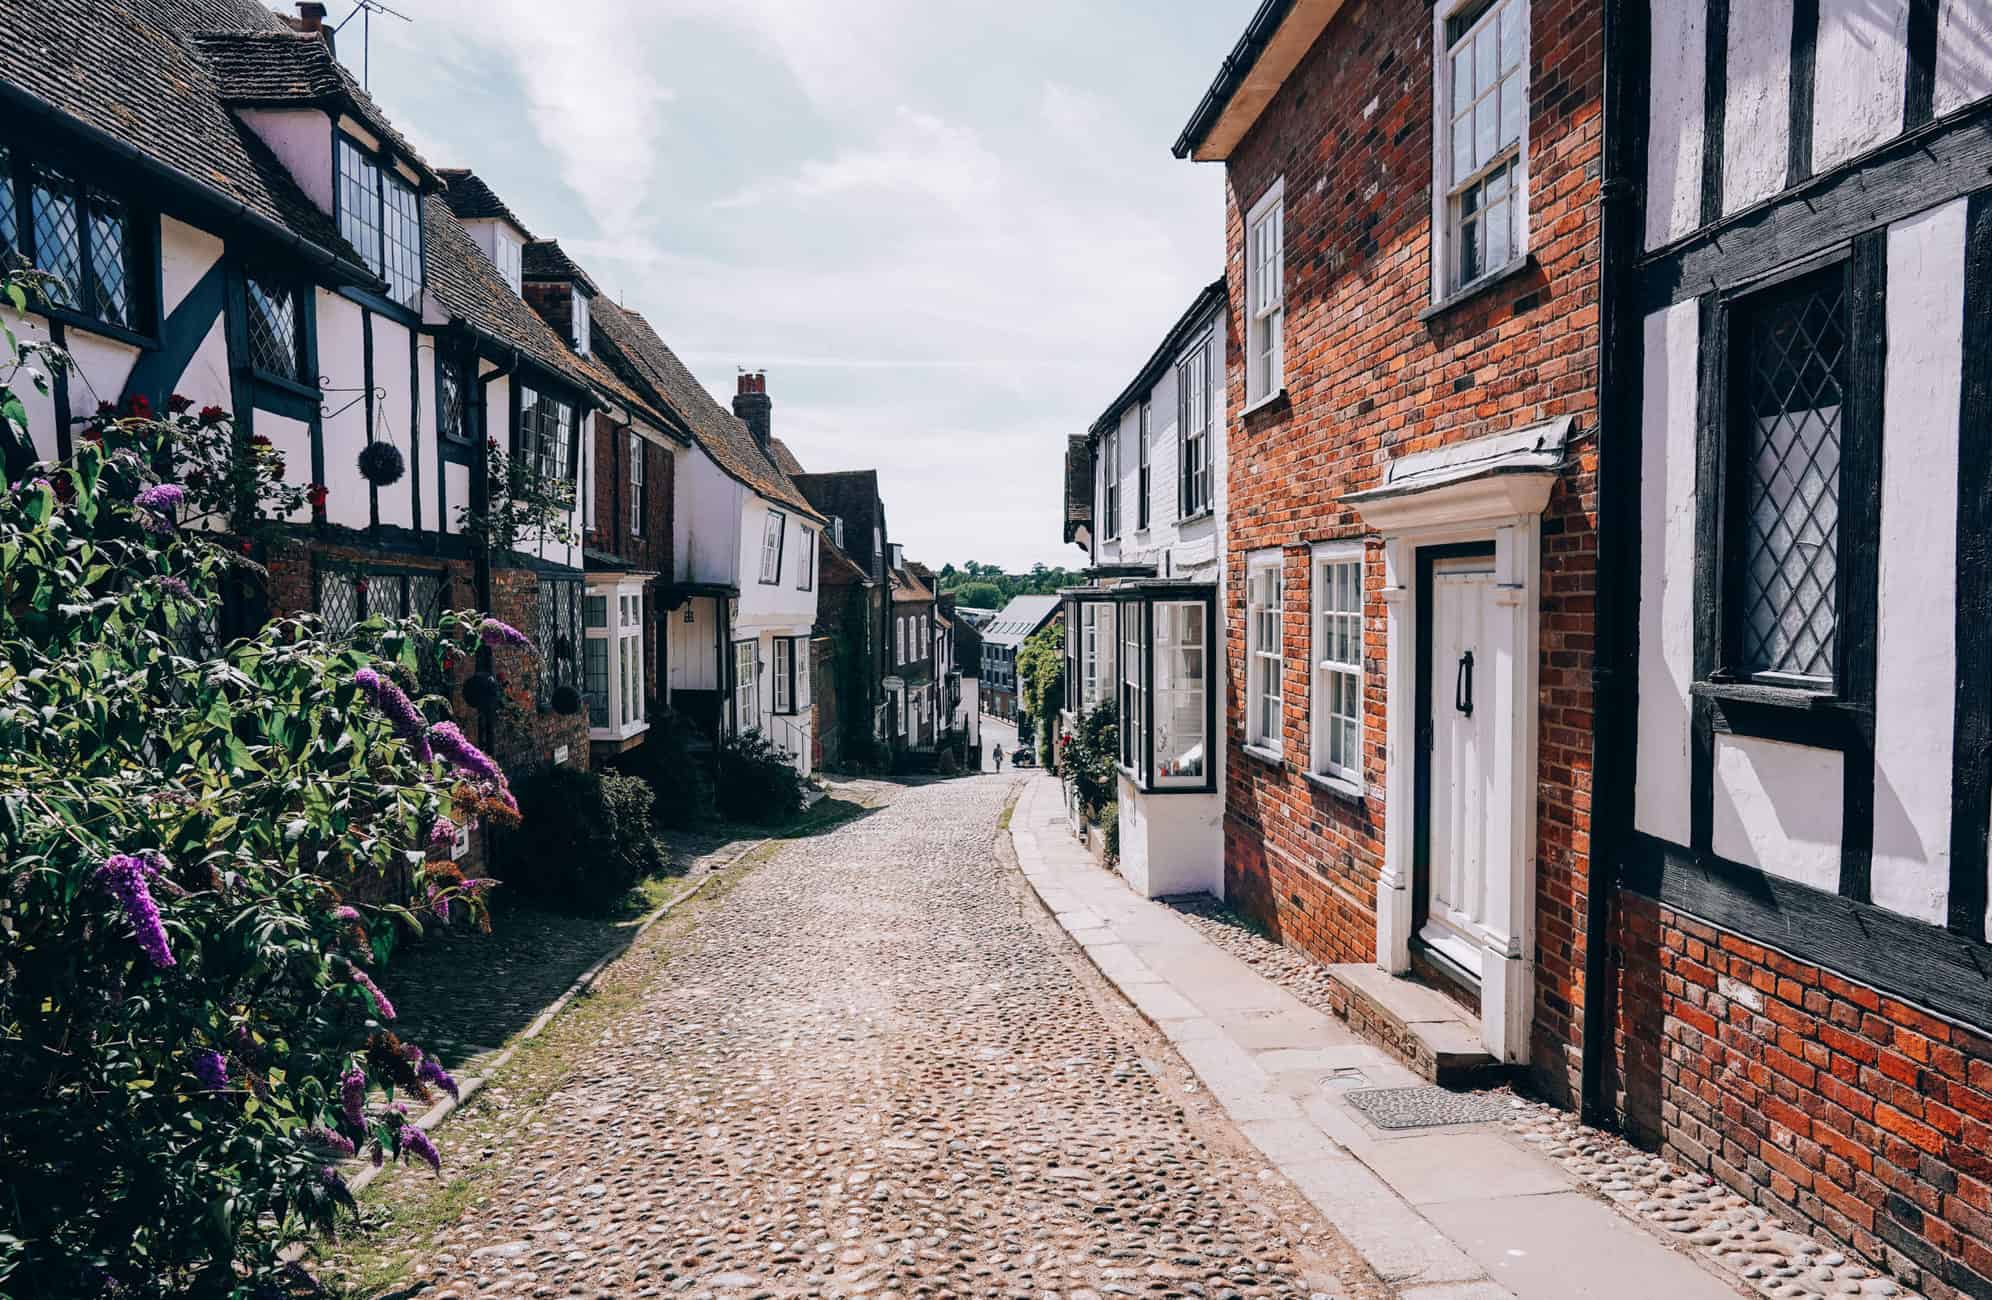 Sussex Day Trip from London: Rye, Battle and Hastings